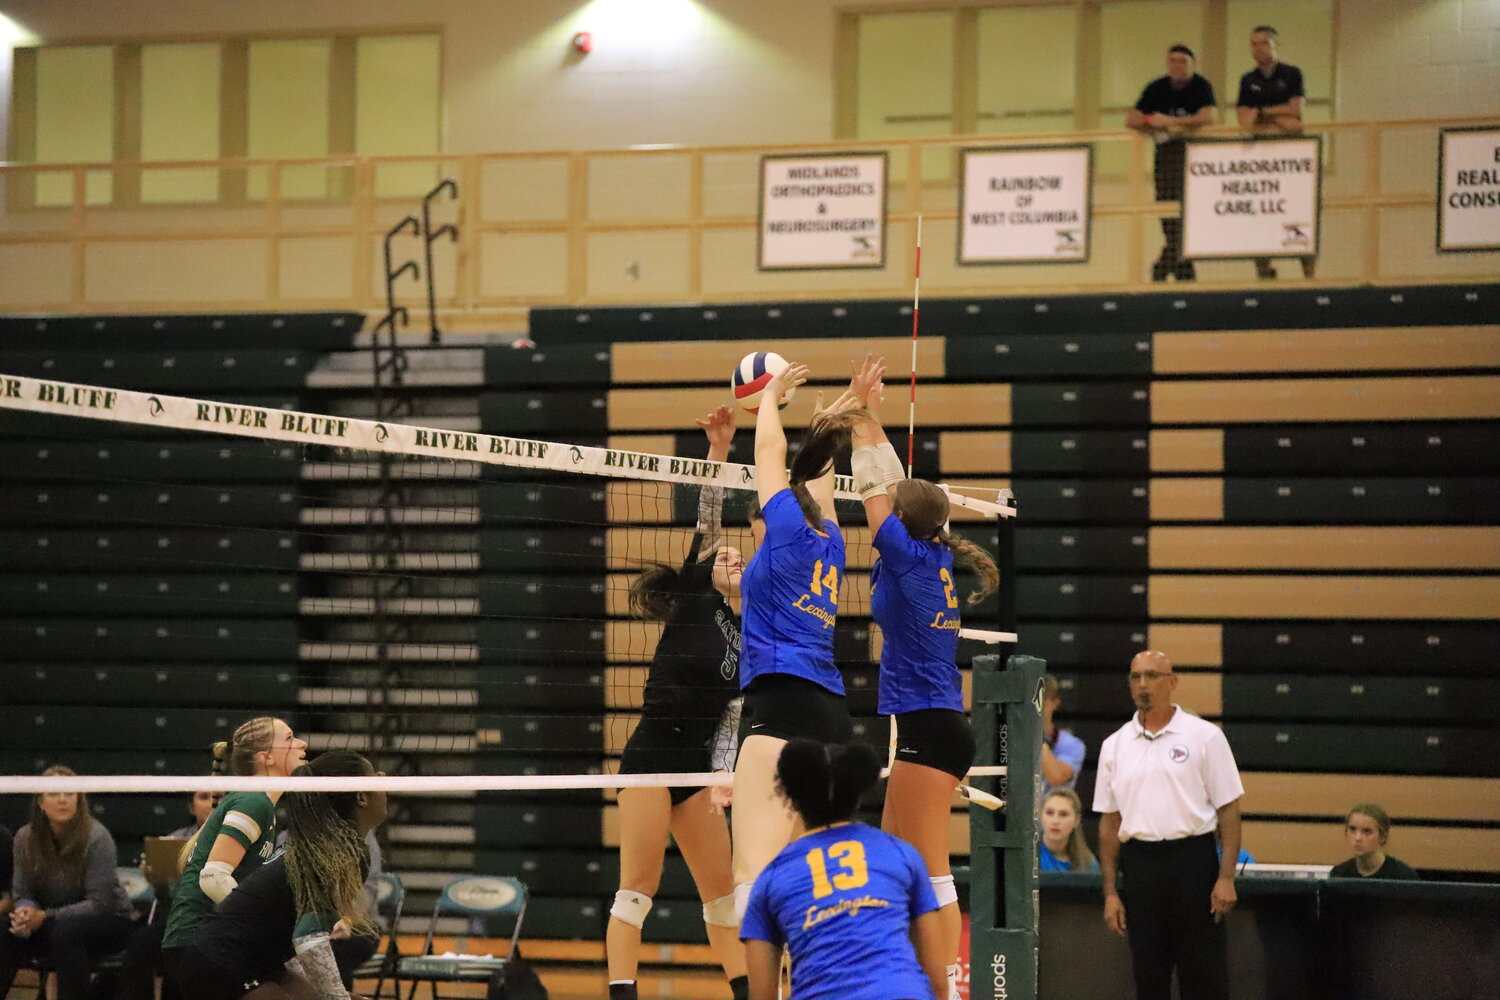 River Bluff’s Caroline Tucker makes a play at the net during the 3-0 loss to Lexington.